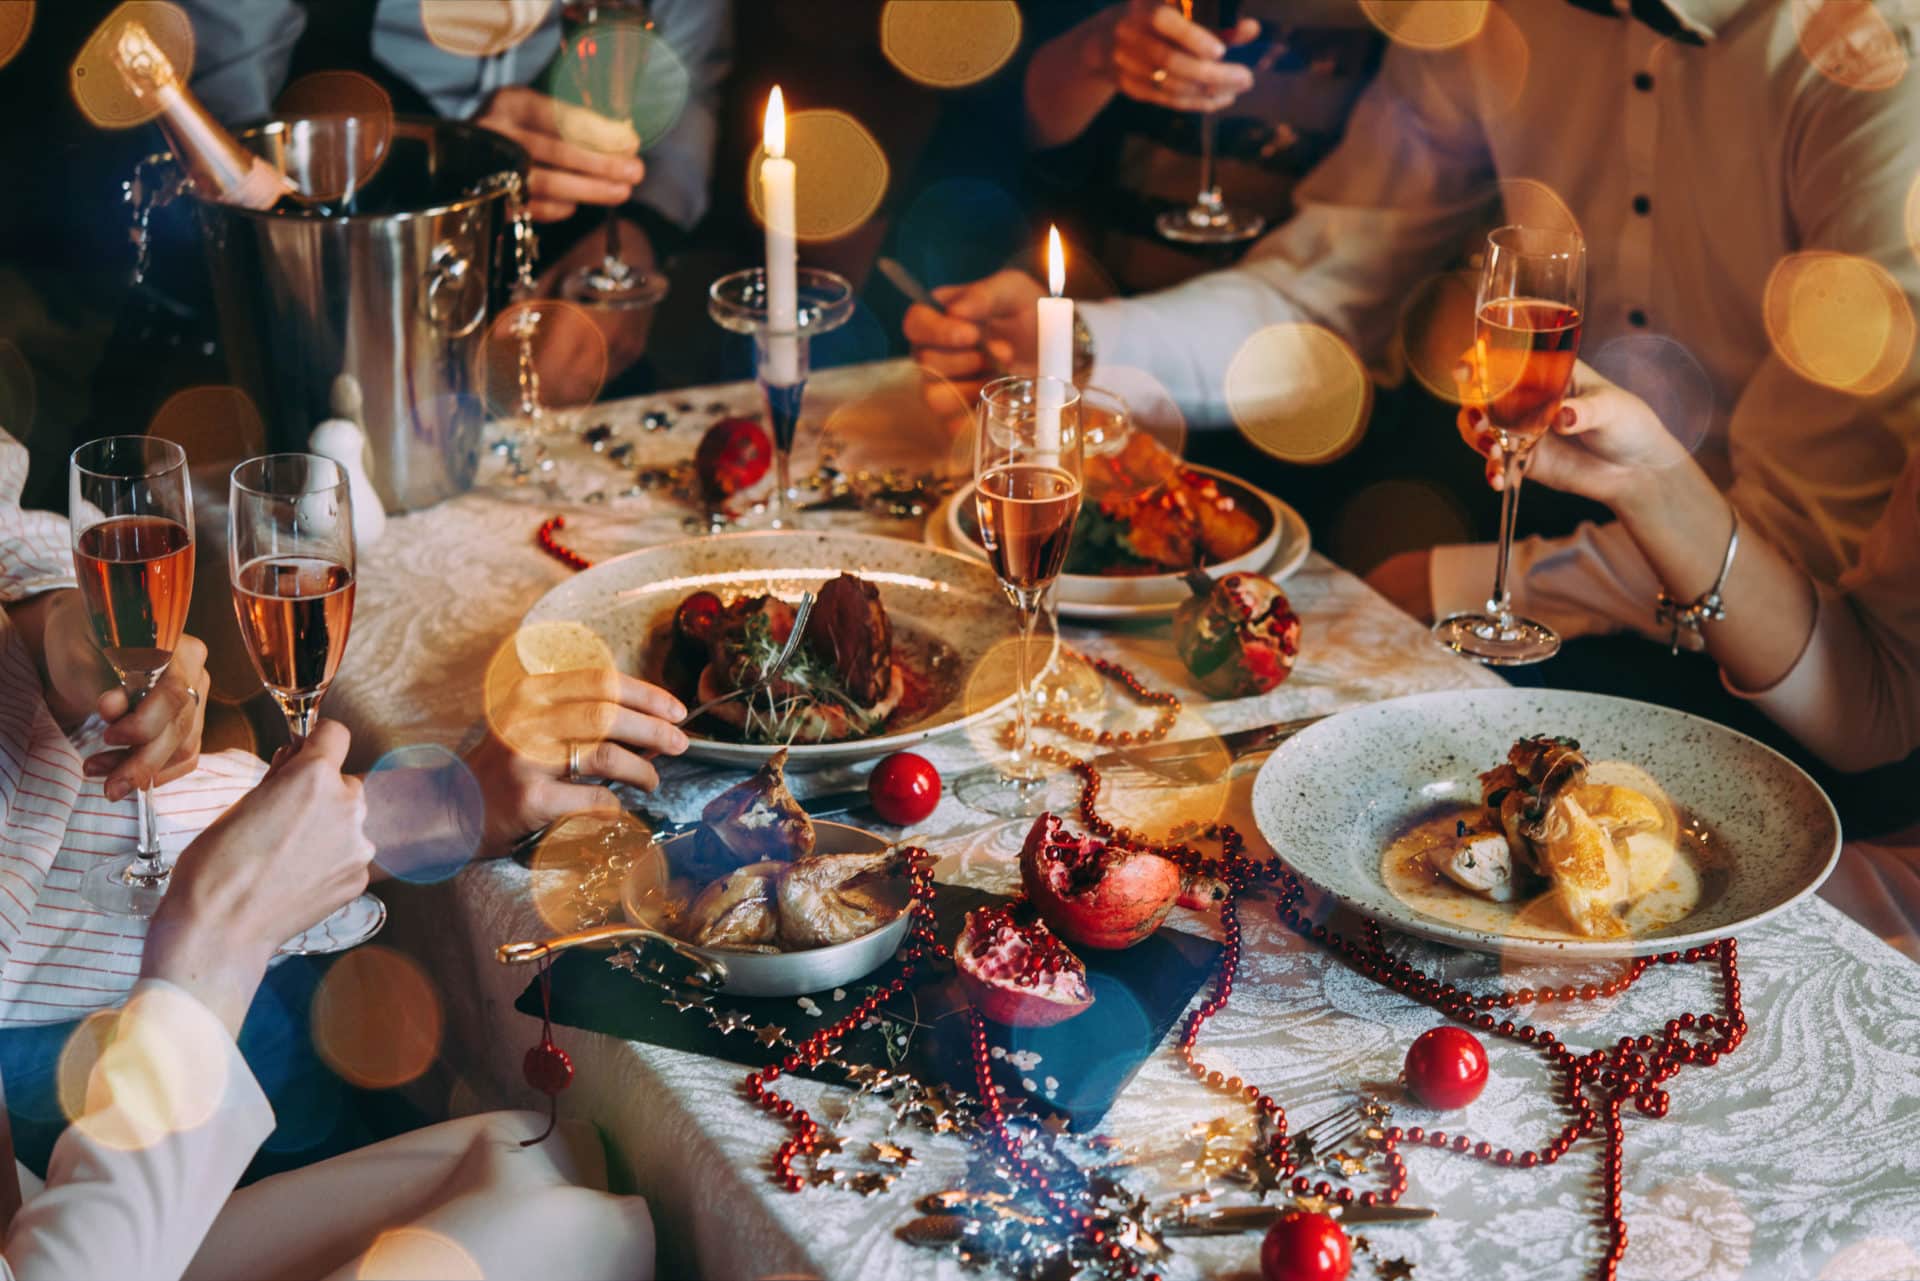 Food Poisoning: How to Keep Your NY Dinner Guests Safe